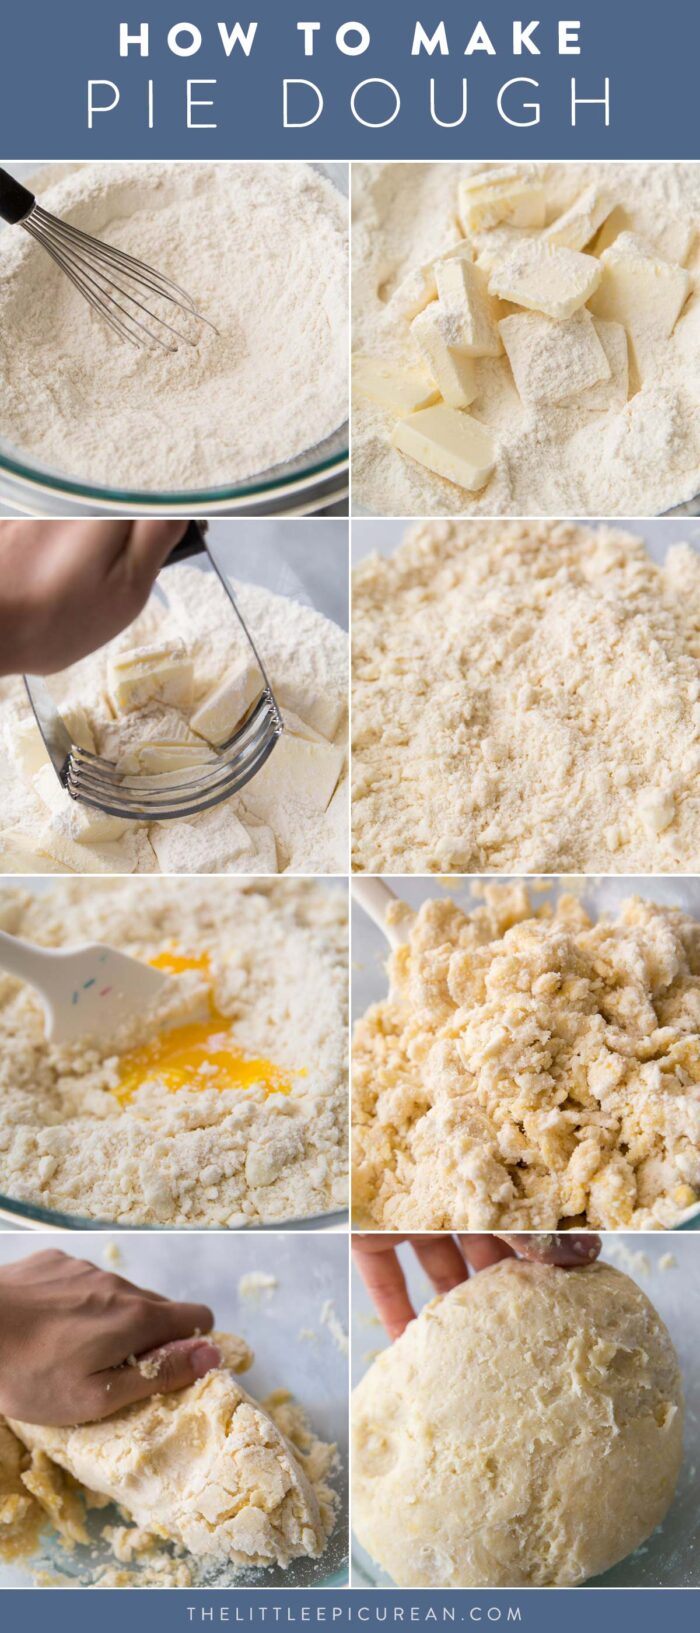 step by step images how to make pie dough by hand.